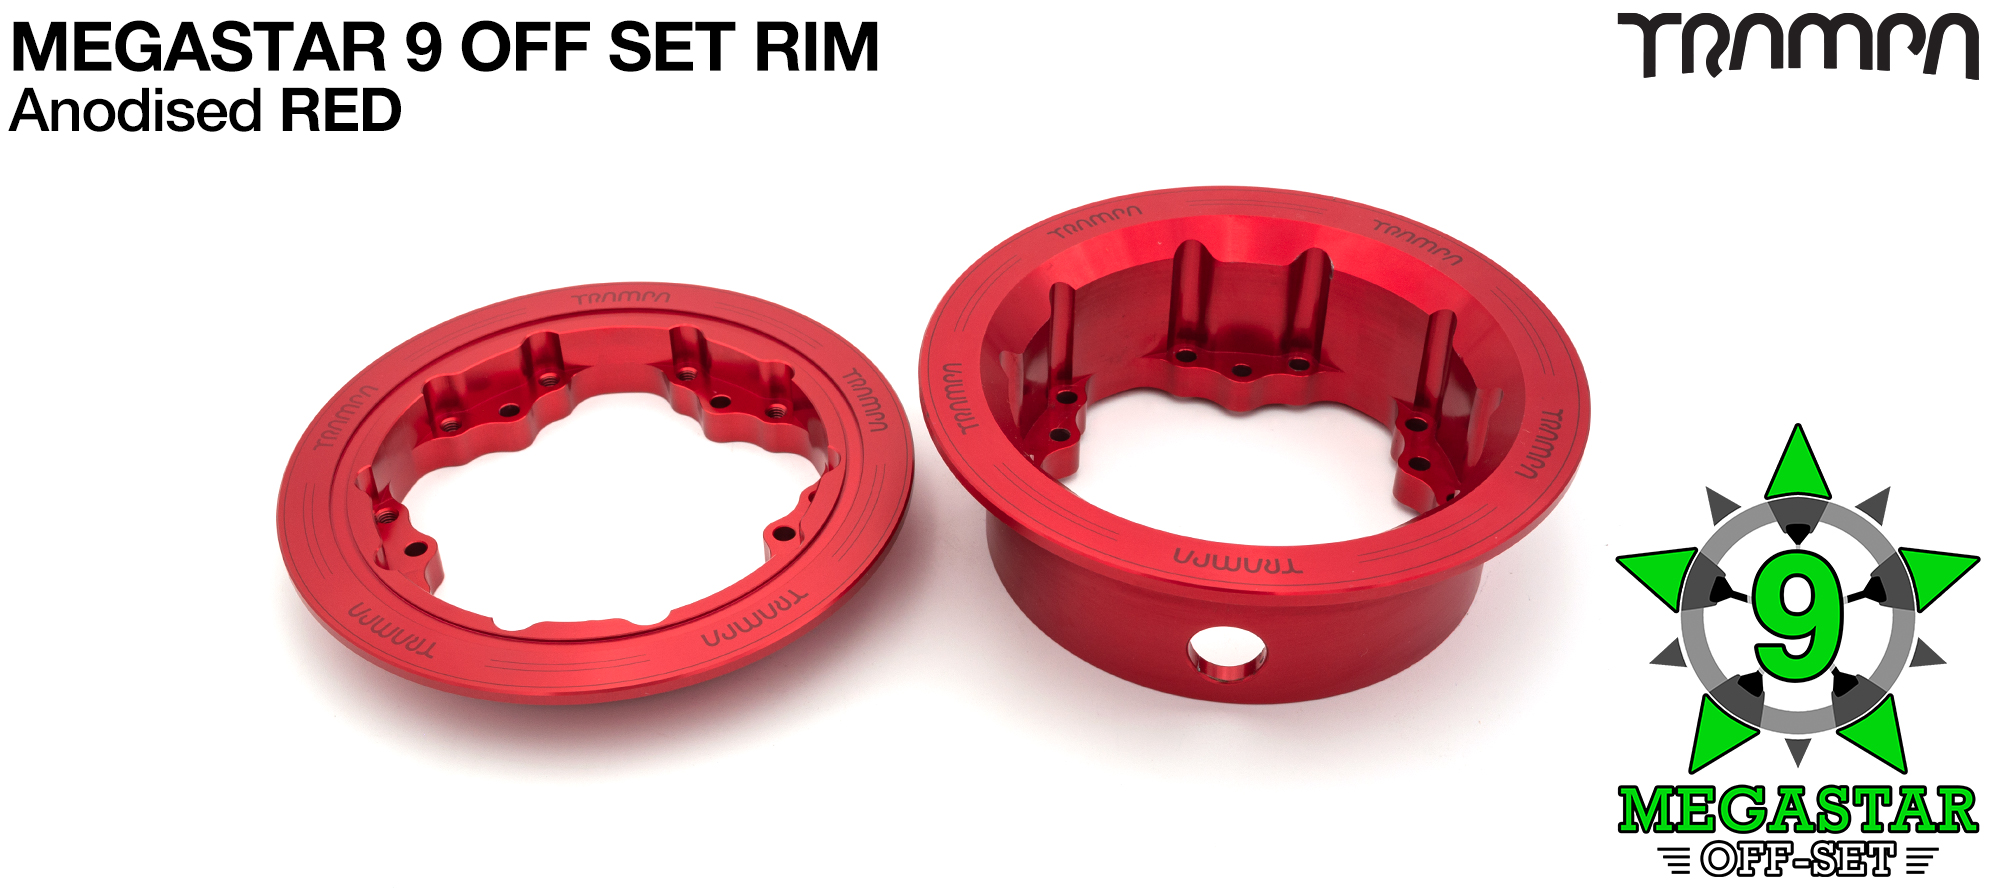 MEGASTAR 9 Rims Measure 3.75/4x 2.5 Inch & the bearings are positioned OFF-SET & accept 3.75 & 4 Inch Rim Tyres - RED